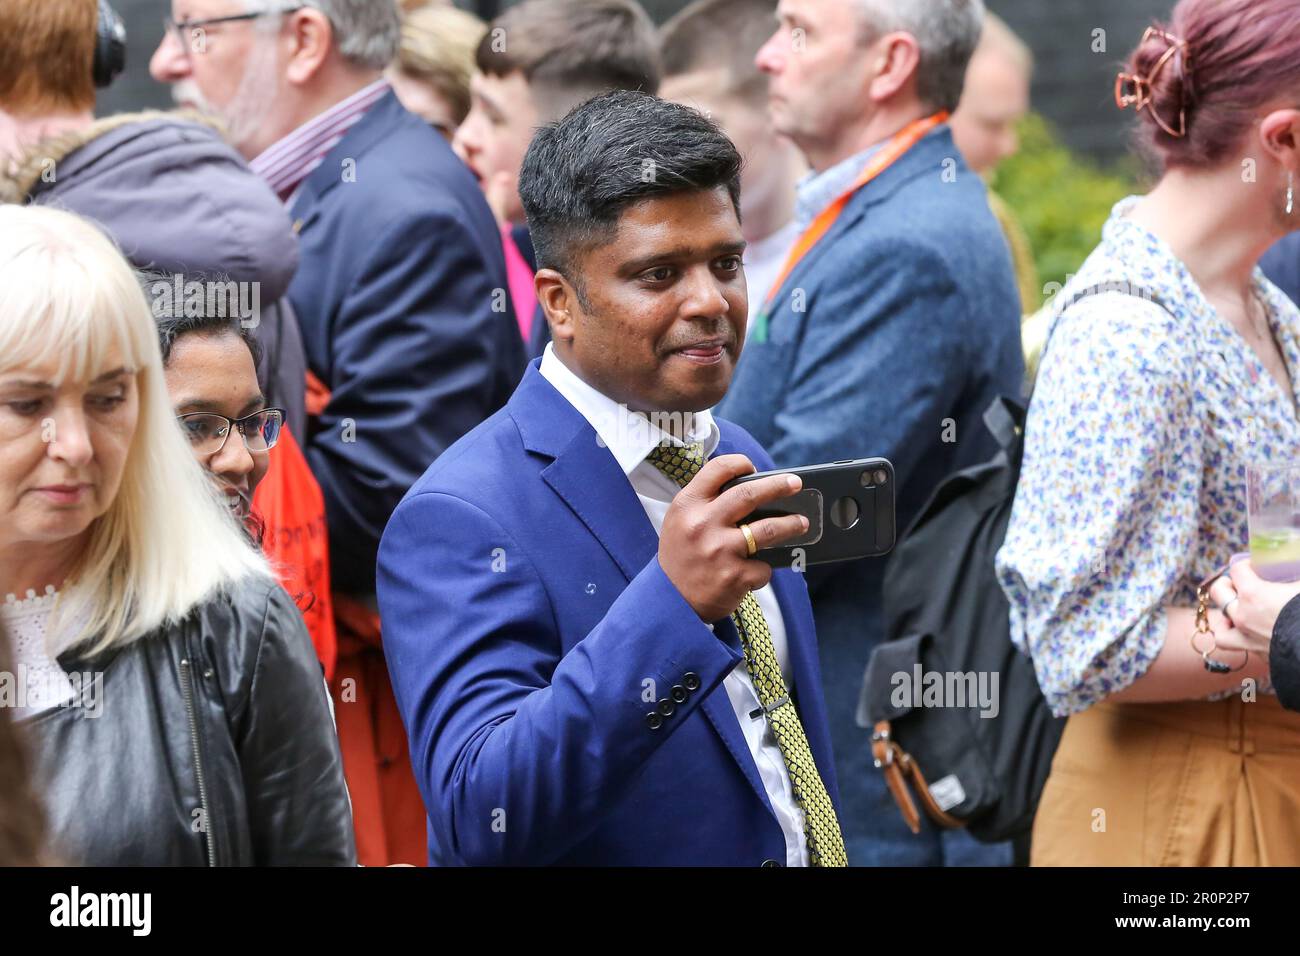 A man takes photos during the Coronation Big Lunch. British Prime Minster, Rishi Sunak and his wife, Akshata Murty host the Coronation Big Lunch in Downing Street in central London following the Coronation of King Charles III on 6 May 2023. The event was attended by community heroes, volunteers, families from Ukraine and special guest First lady, Jill Biden, wife of the President of United States of America, Joe Biden with granddaughter Finnegan Biden. Stock Photo